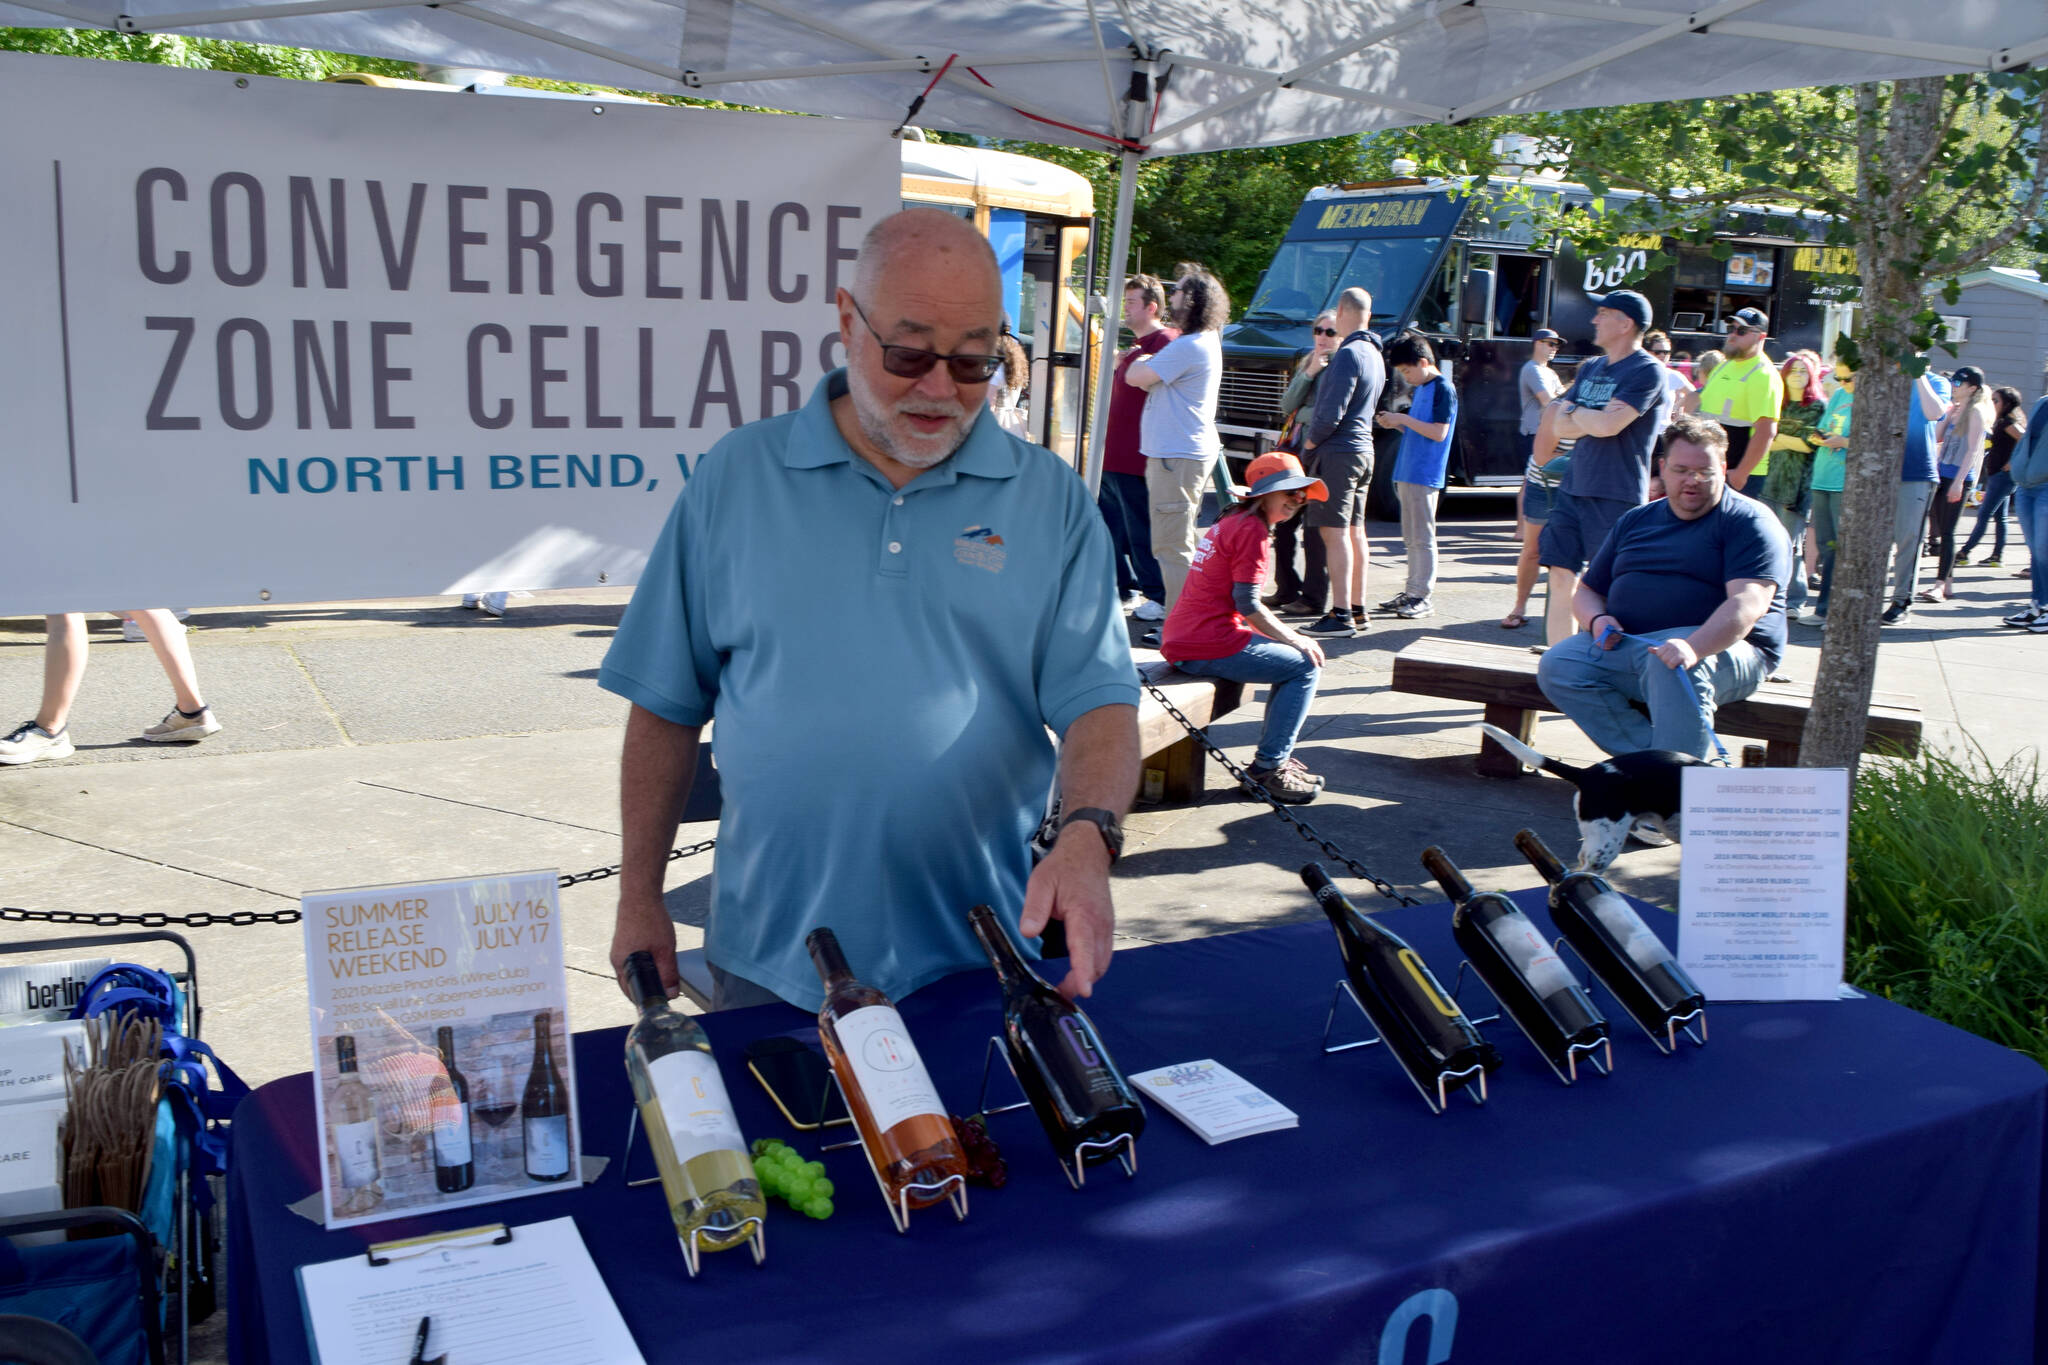 Scott Greenberg, owner of Convergence Zone Cellars winery, points at one of his wines during the North Bend Farmers Market on June 23.